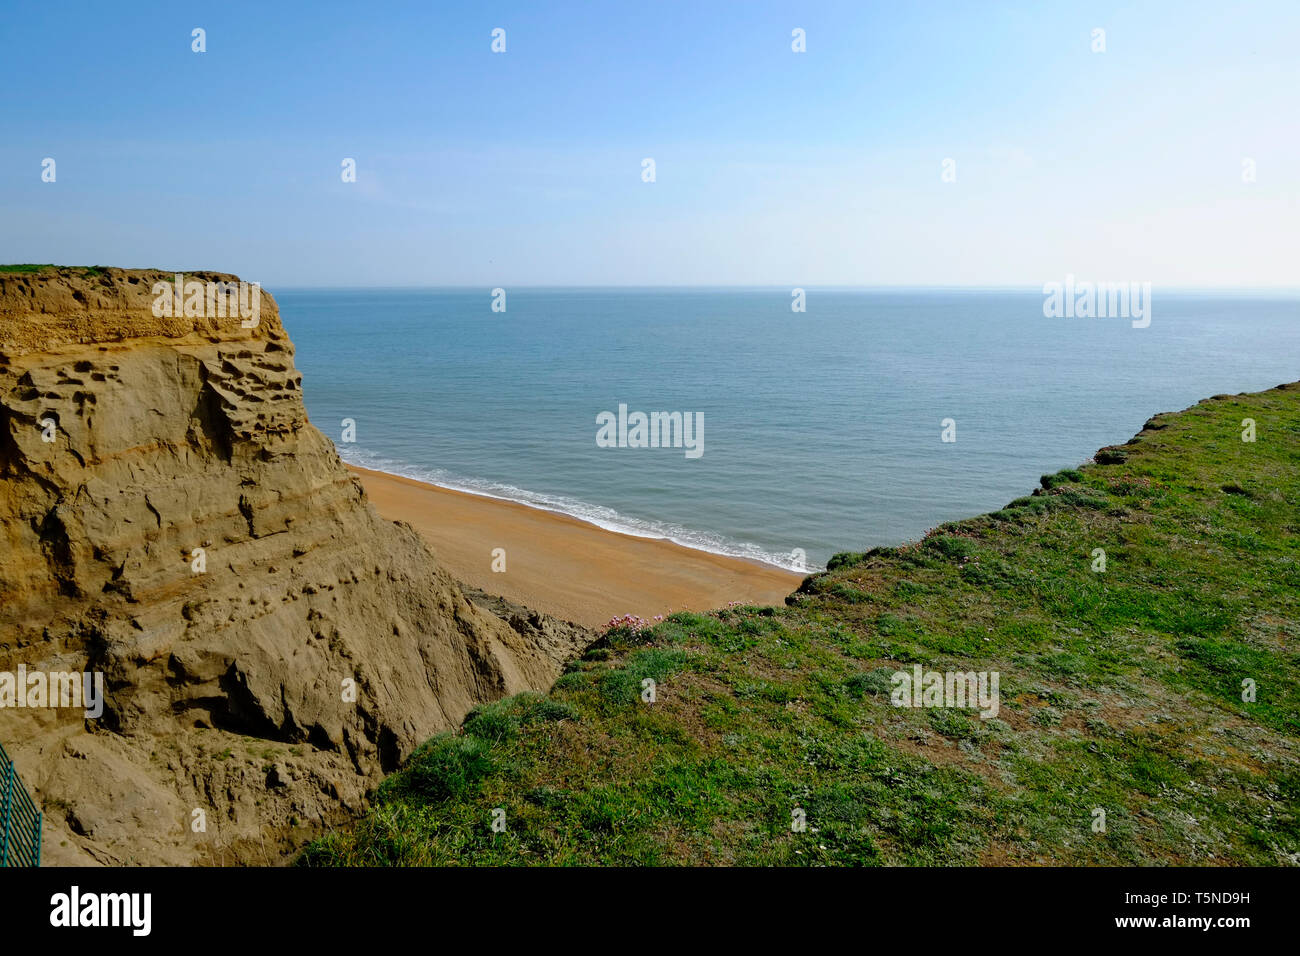 View of Chale Bay from the top of Whale Chine, Isle of Wight, UK. Stock Photo